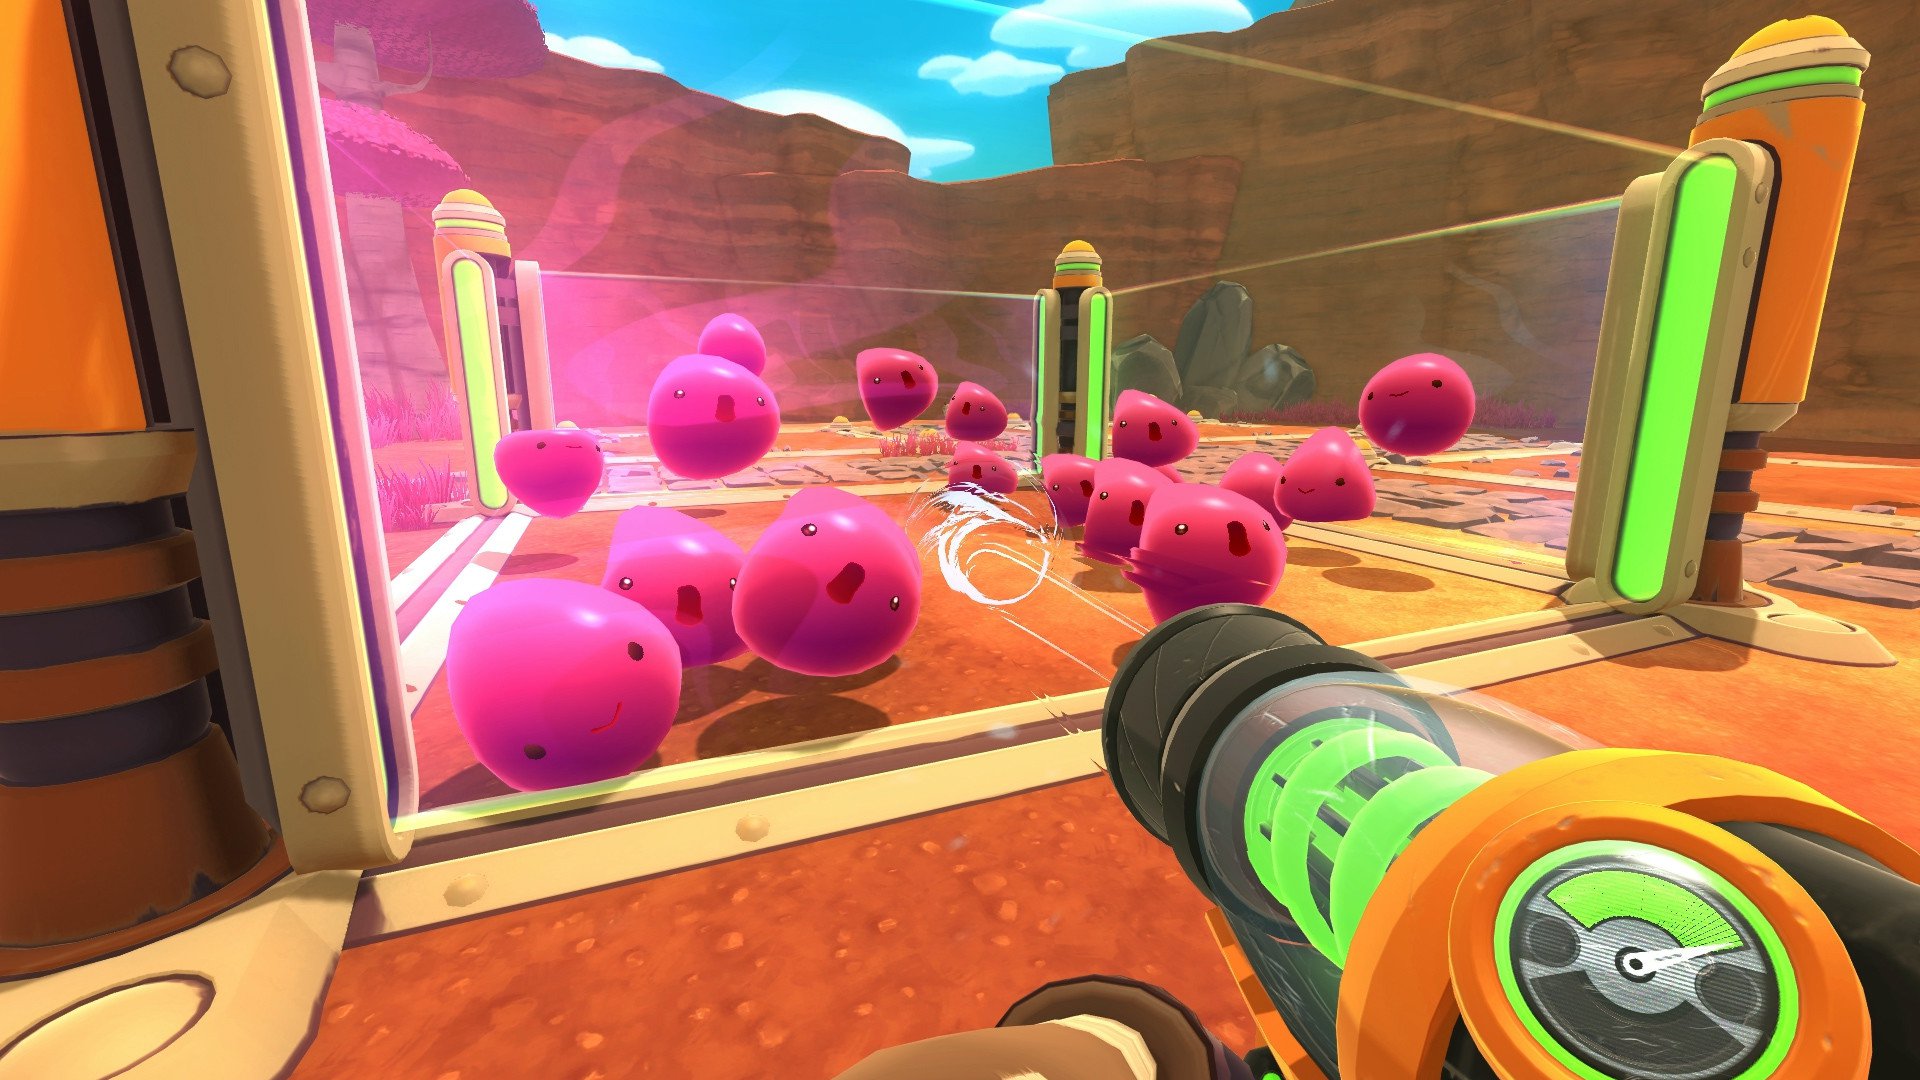 How to download slime rancher for free